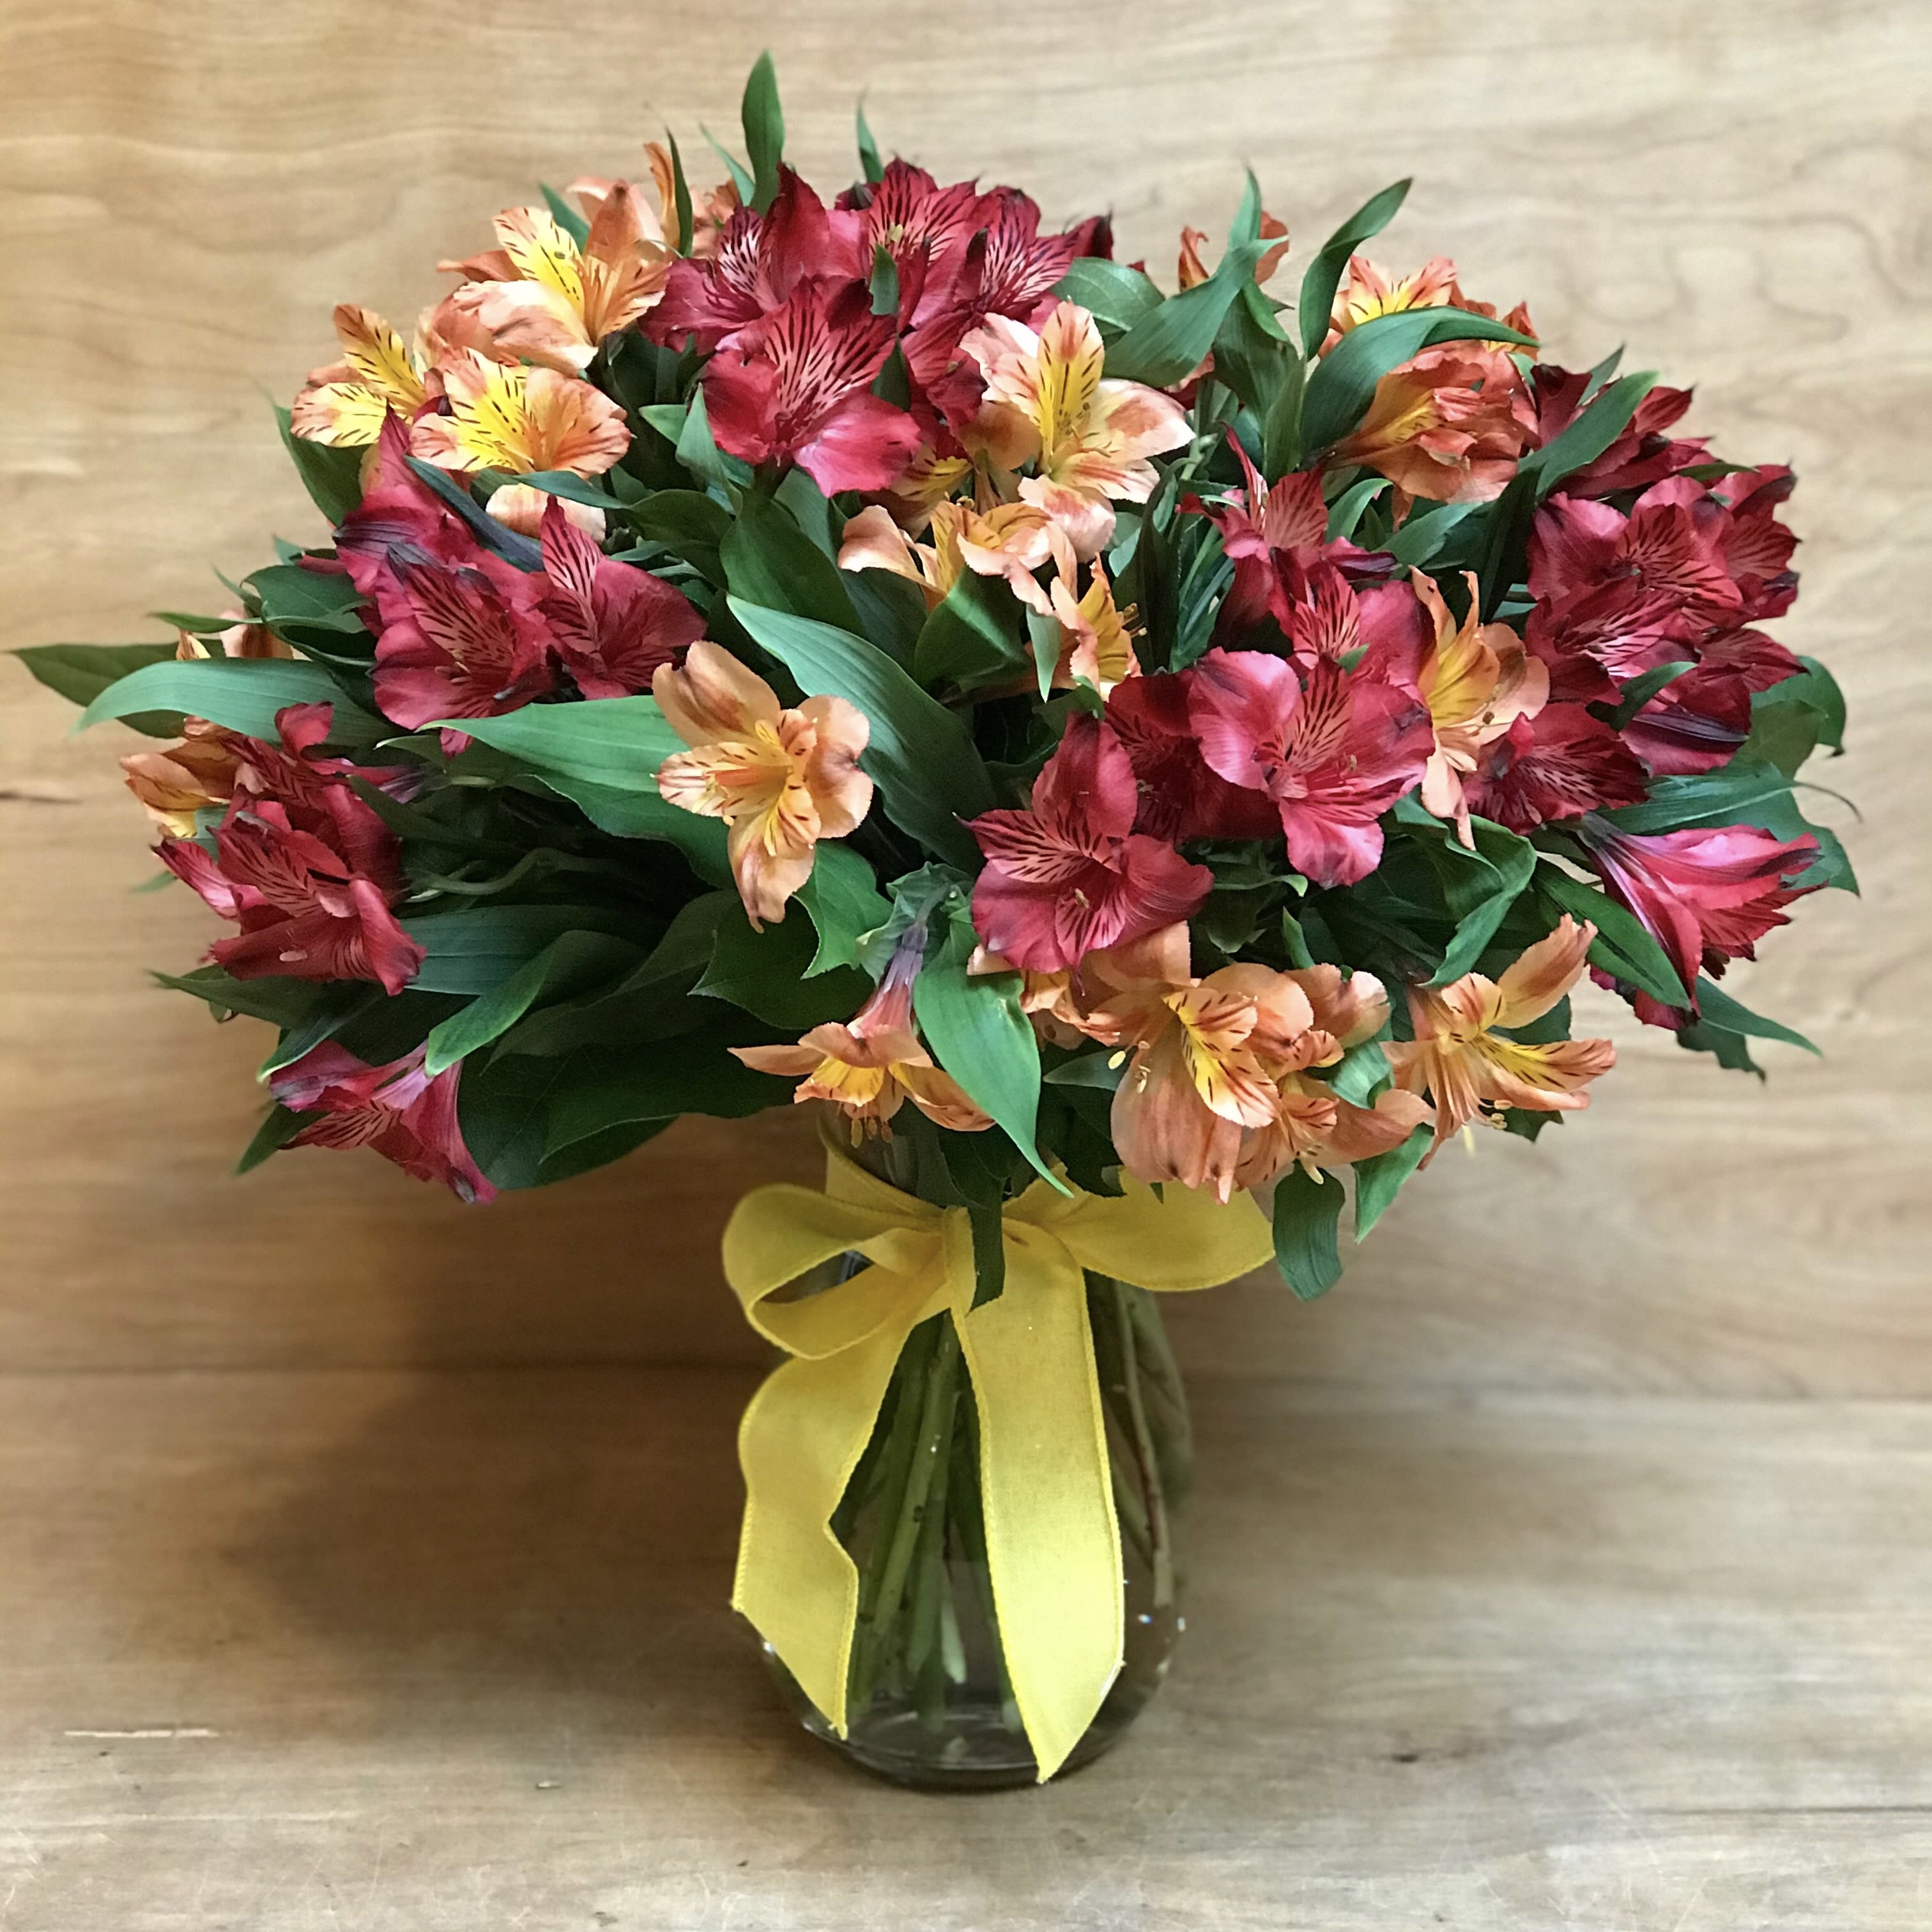 Amazing Alstroemerias  - Long lasting Alstroemerias will brighten any room .   Choose from Bright mix , shades of pink or white .      Approximately 21” tall  JUST LET US KNOW, IN SPECIAL INSTRUCTIONS,  WHICH COLOR YOU PREFER 